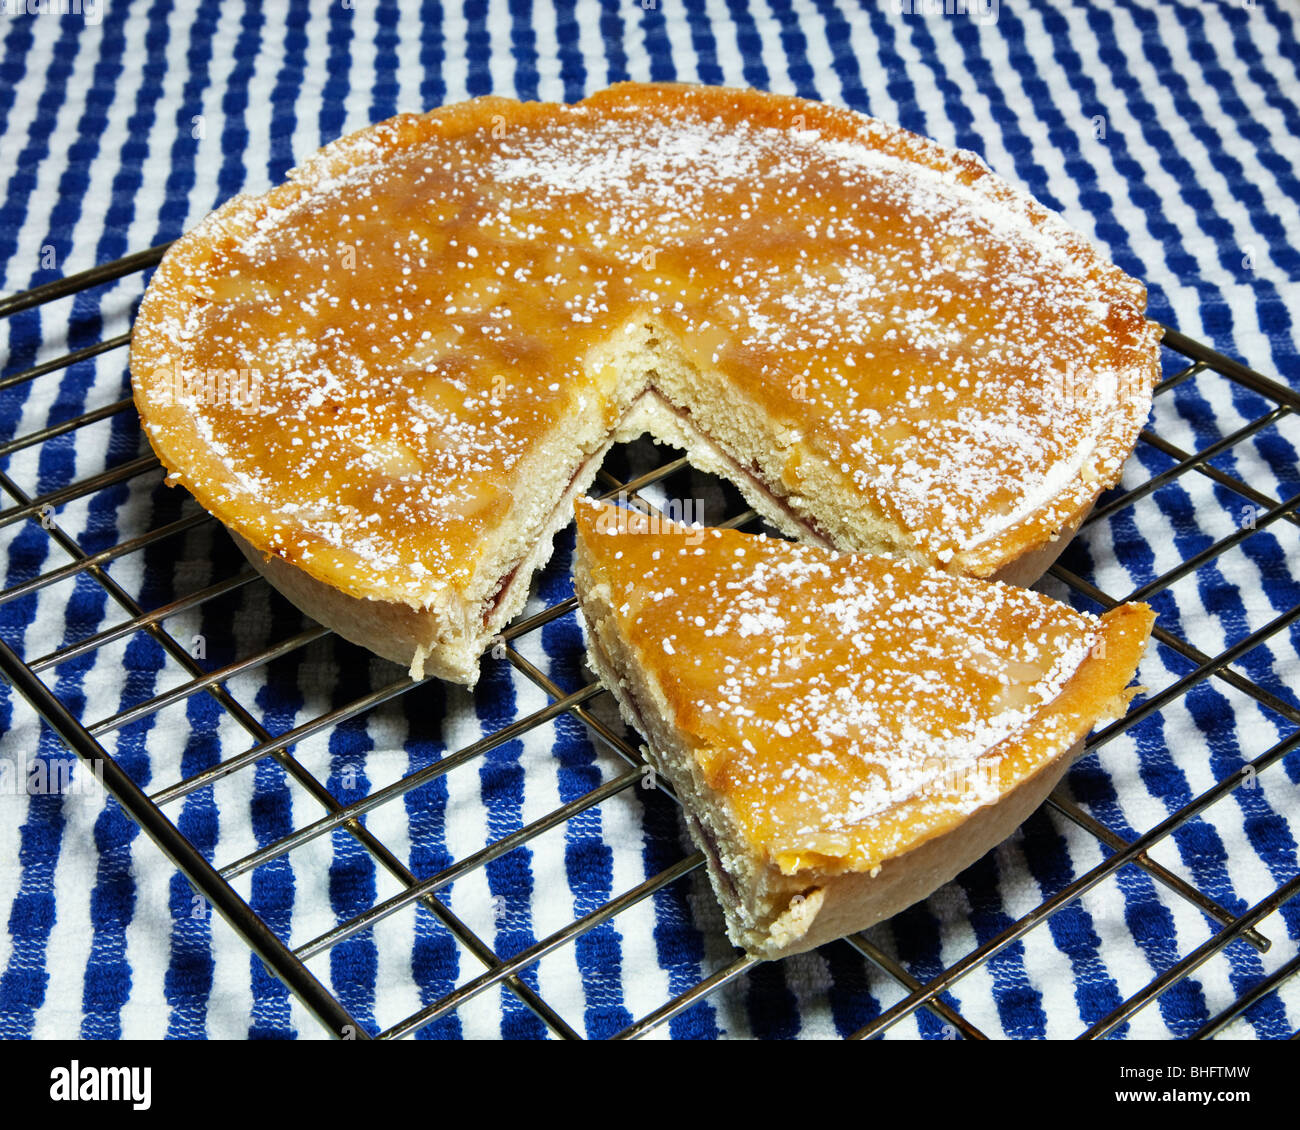 A bakewell tart with a slice cut out on a wire rack. Stock Photo